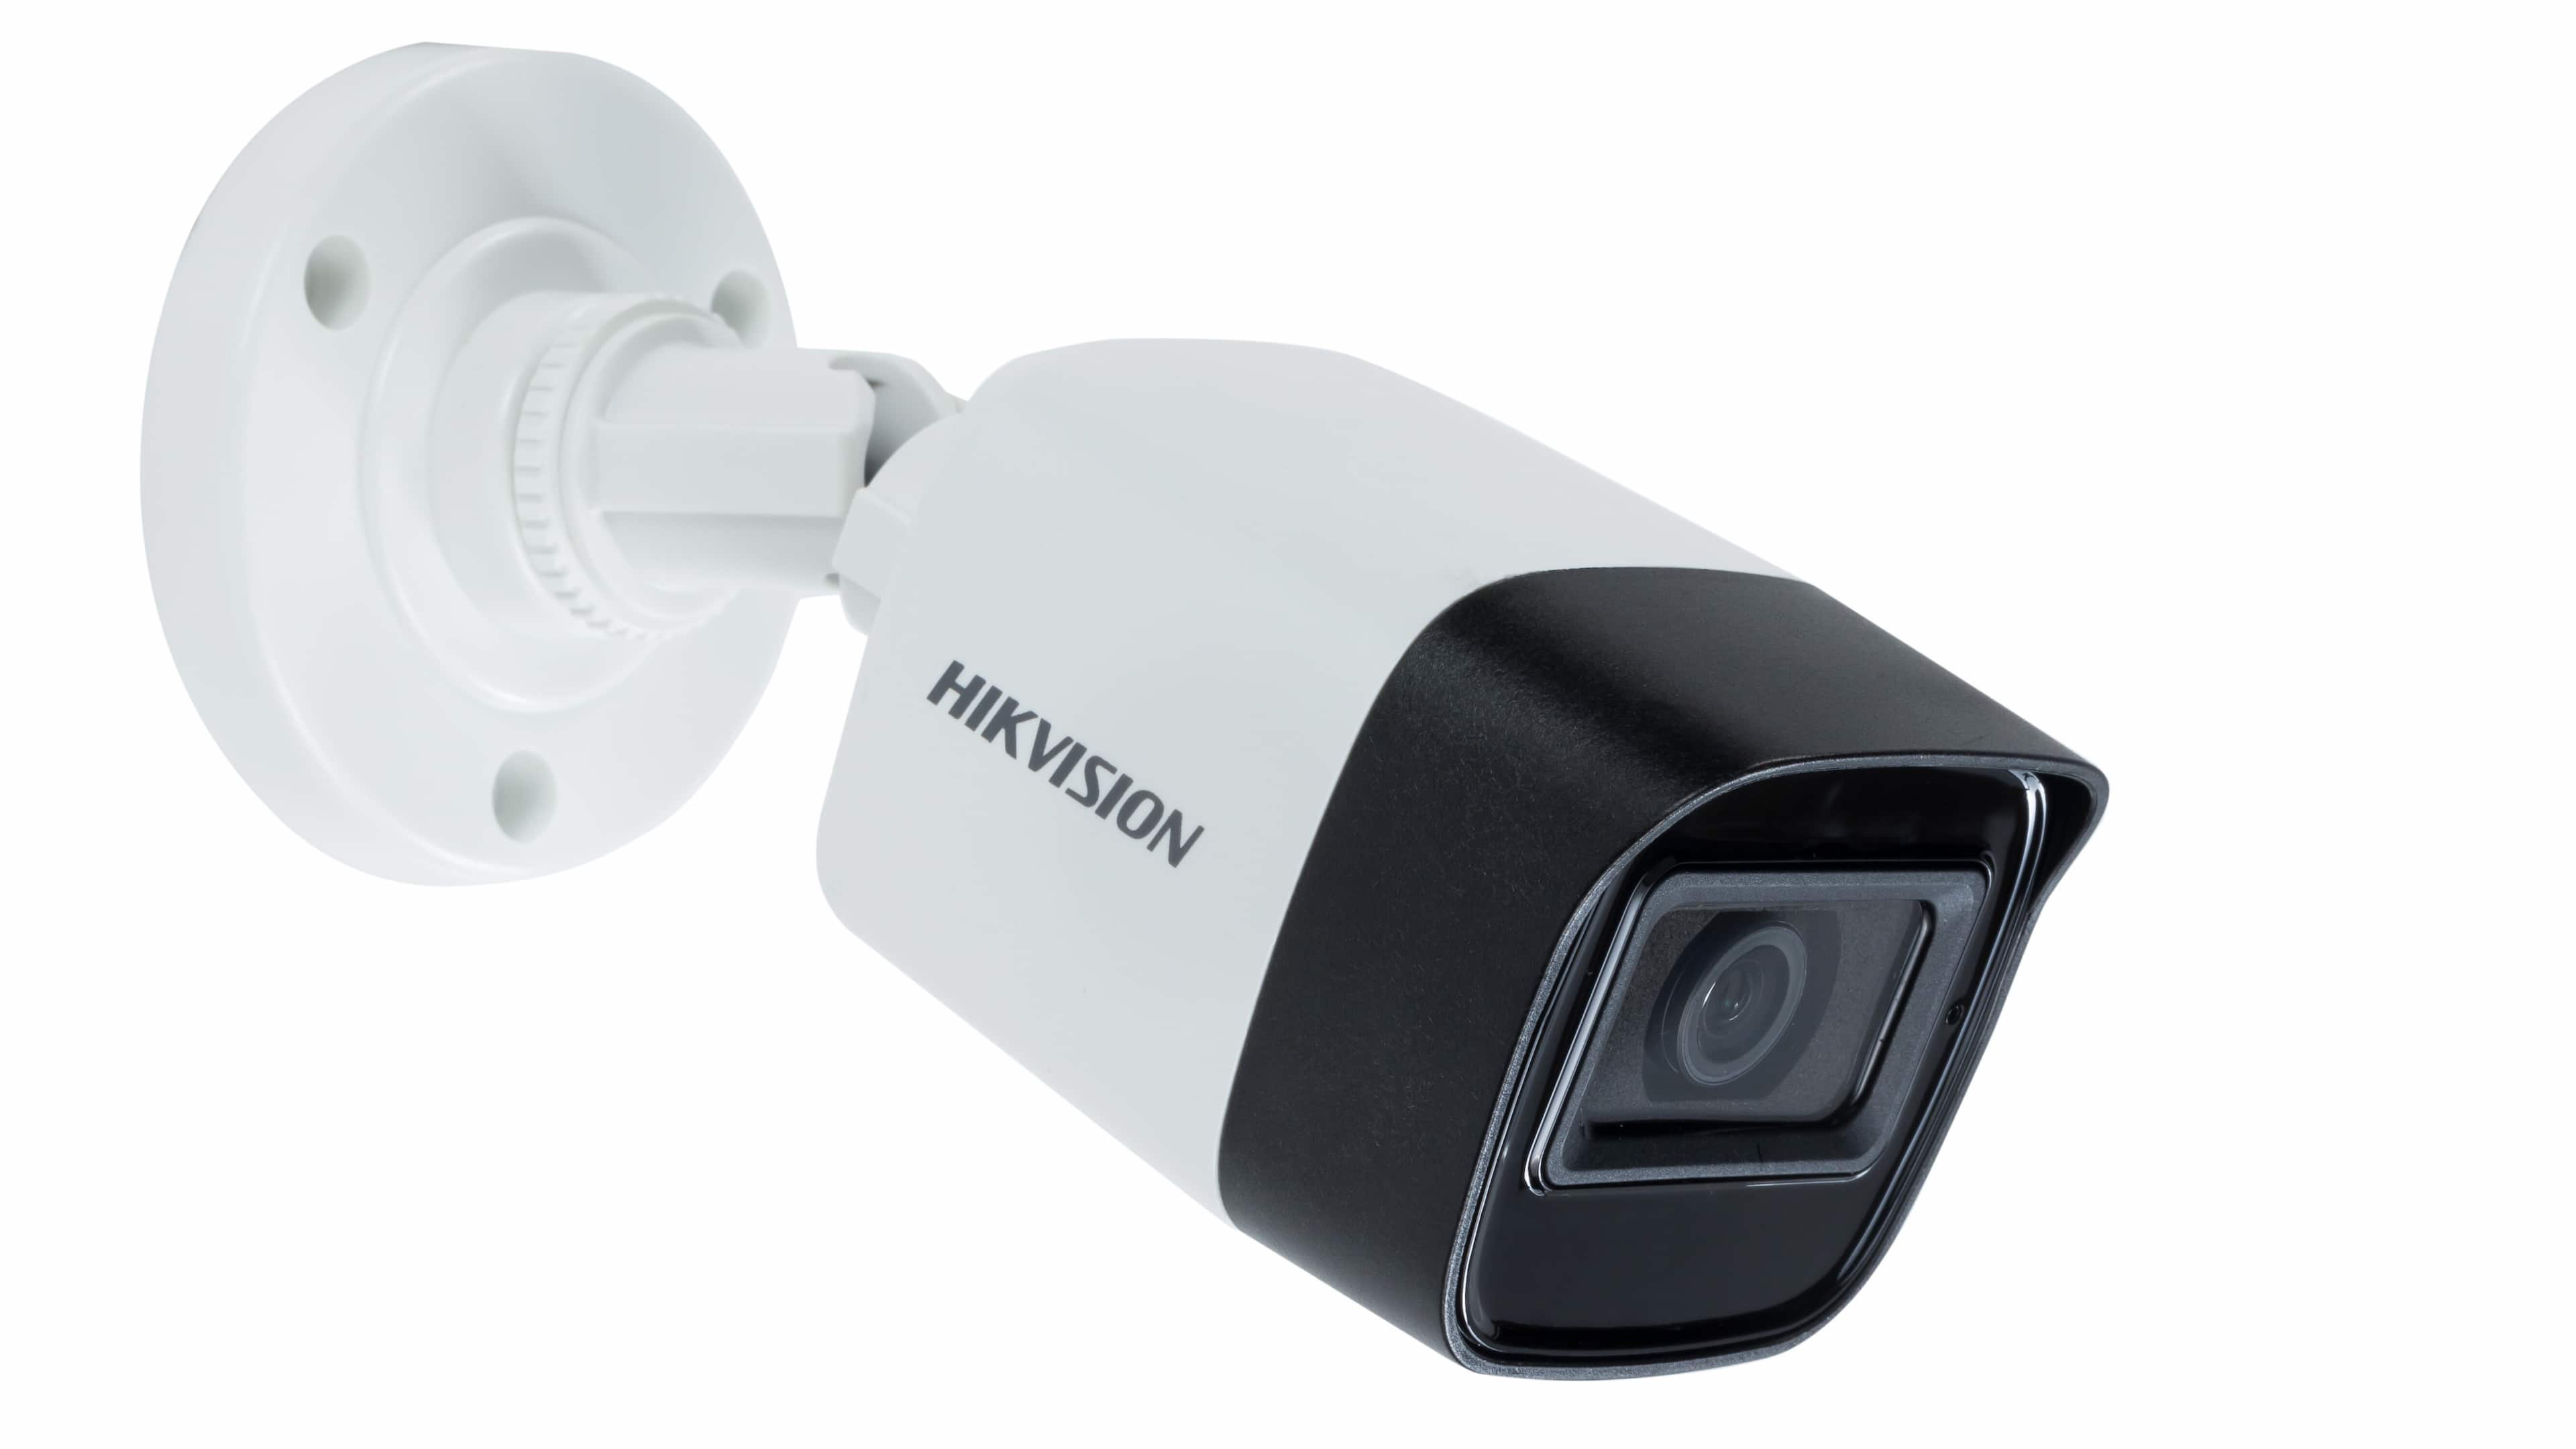 Hikvision-5MP-Audio-Fixed-Mini-Bullet-Camera-DS-2CE16H0T-ITPFS-image_2